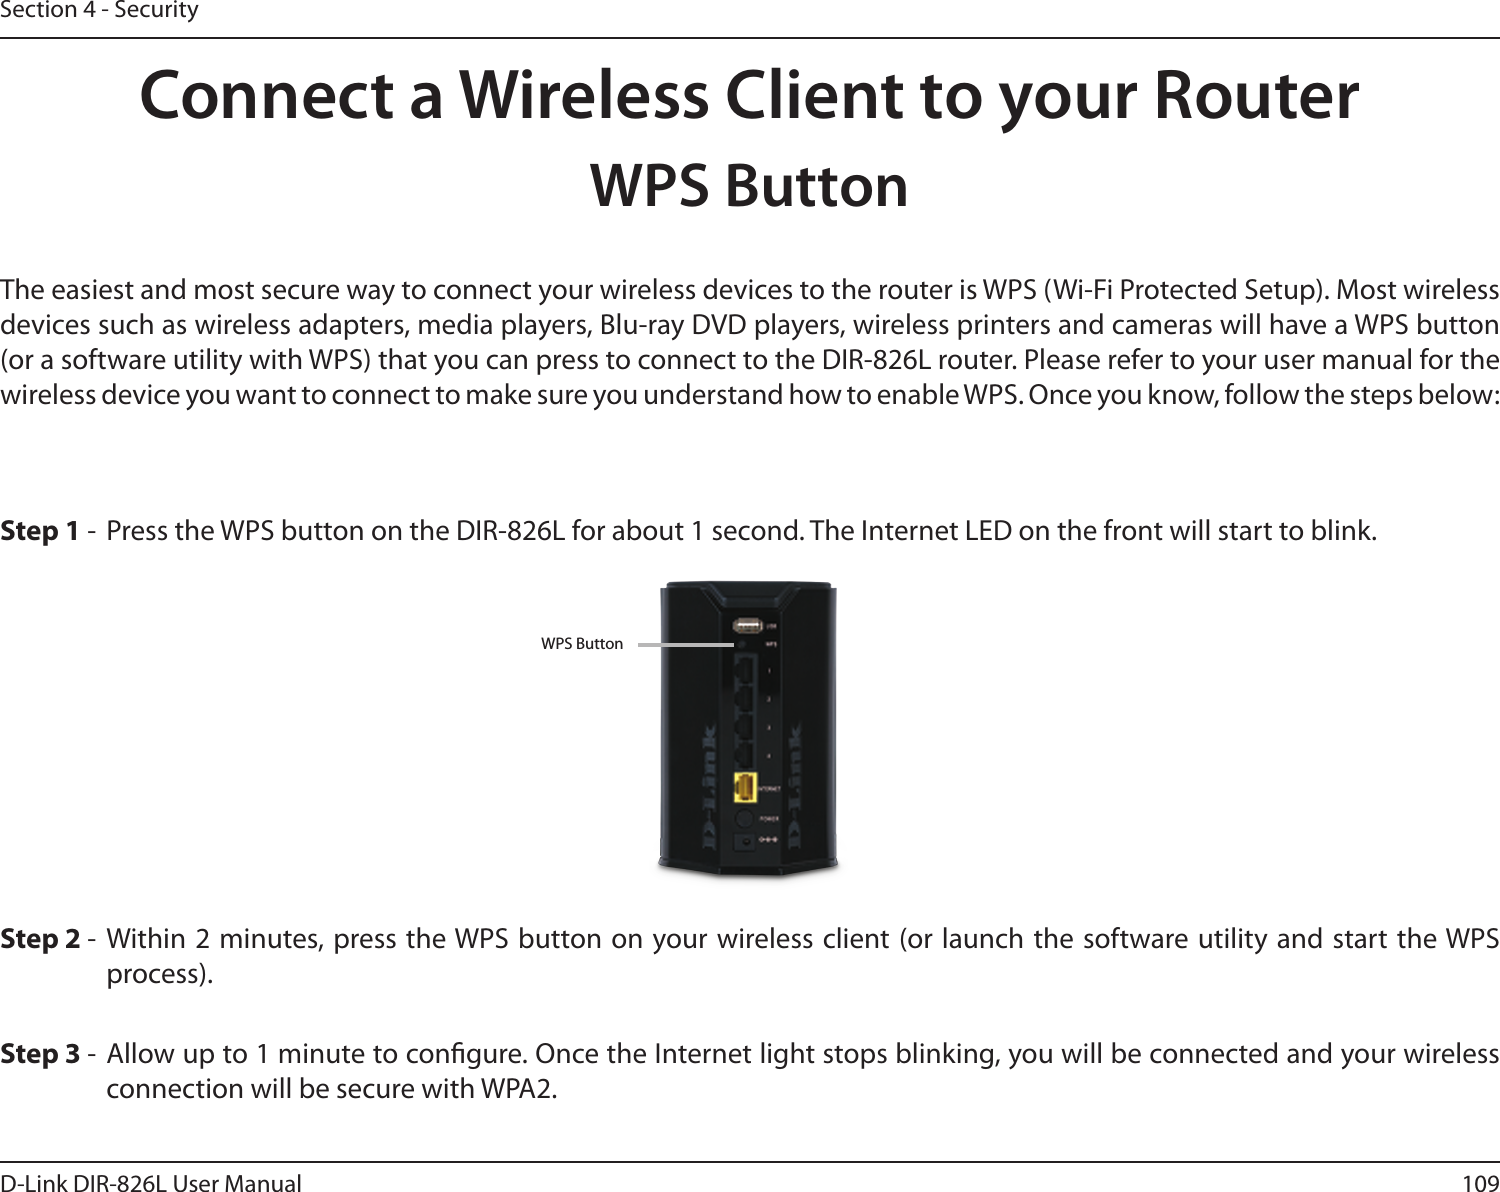 109D-Link DIR-826L User ManualSection 4 - SecurityConnect a Wireless Client to your RouterWPS ButtonStep 2 -  Within 2 minutes, press the WPS button on your wireless client (or launch the software utility and start the WPS process).The easiest and most secure way to connect your wireless devices to the router is WPS (Wi-Fi Protected Setup). Most wireless devices such as wireless adapters, media players, Blu-ray DVD players, wireless printers and cameras will have a WPS button (or a software utility with WPS) that you can press to connect to the DIR-826L router. Please refer to your user manual for the wireless device you want to connect to make sure you understand how to enable WPS. Once you know, follow the steps below:Step 1 -  Press the WPS button on the DIR-826L for about 1 second. The Internet LED on the front will start to blink.Step 3 -  Allow up to 1 minute to congure. Once the Internet light stops blinking, you will be connected and your wireless connection will be secure with WPA2.WPS Button